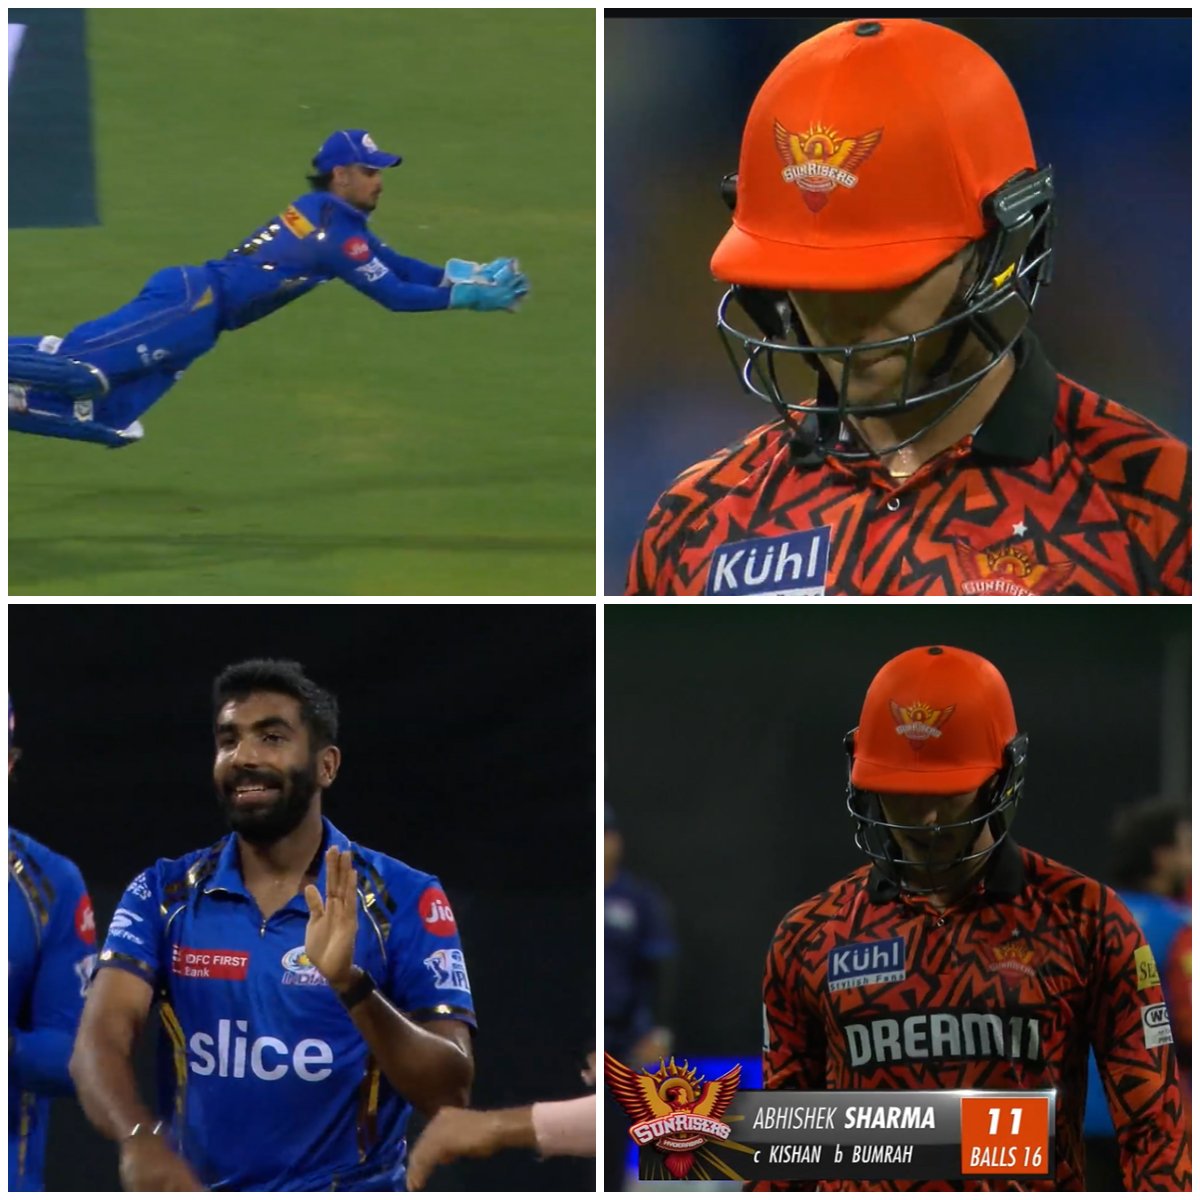 Abhishek Sharma departs for 11 off 16 - Jasprit Bumrah gets the first wicket for MI. bit.ly/TigerExch-Twit…